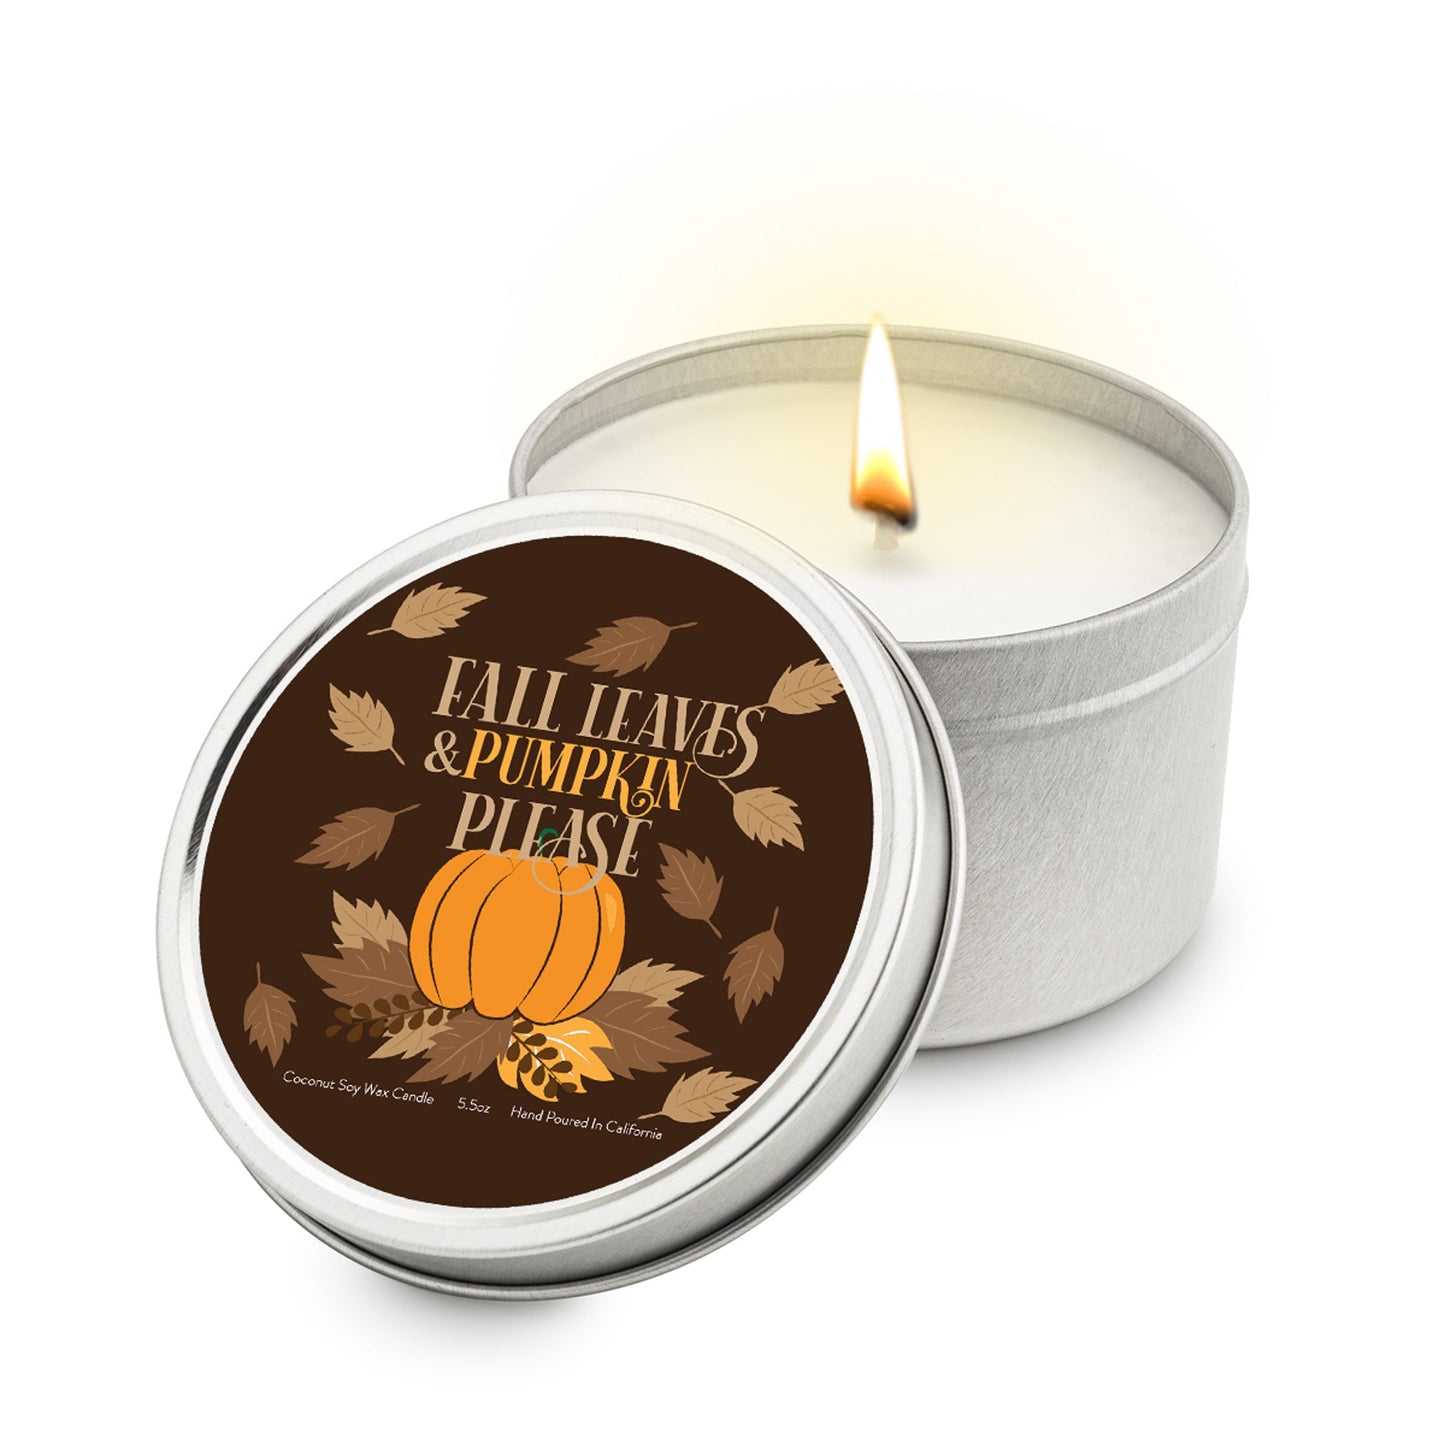 Fall Leaves & Pumpkin Please 5.5 oz Soy Blend Travel Candle Tin